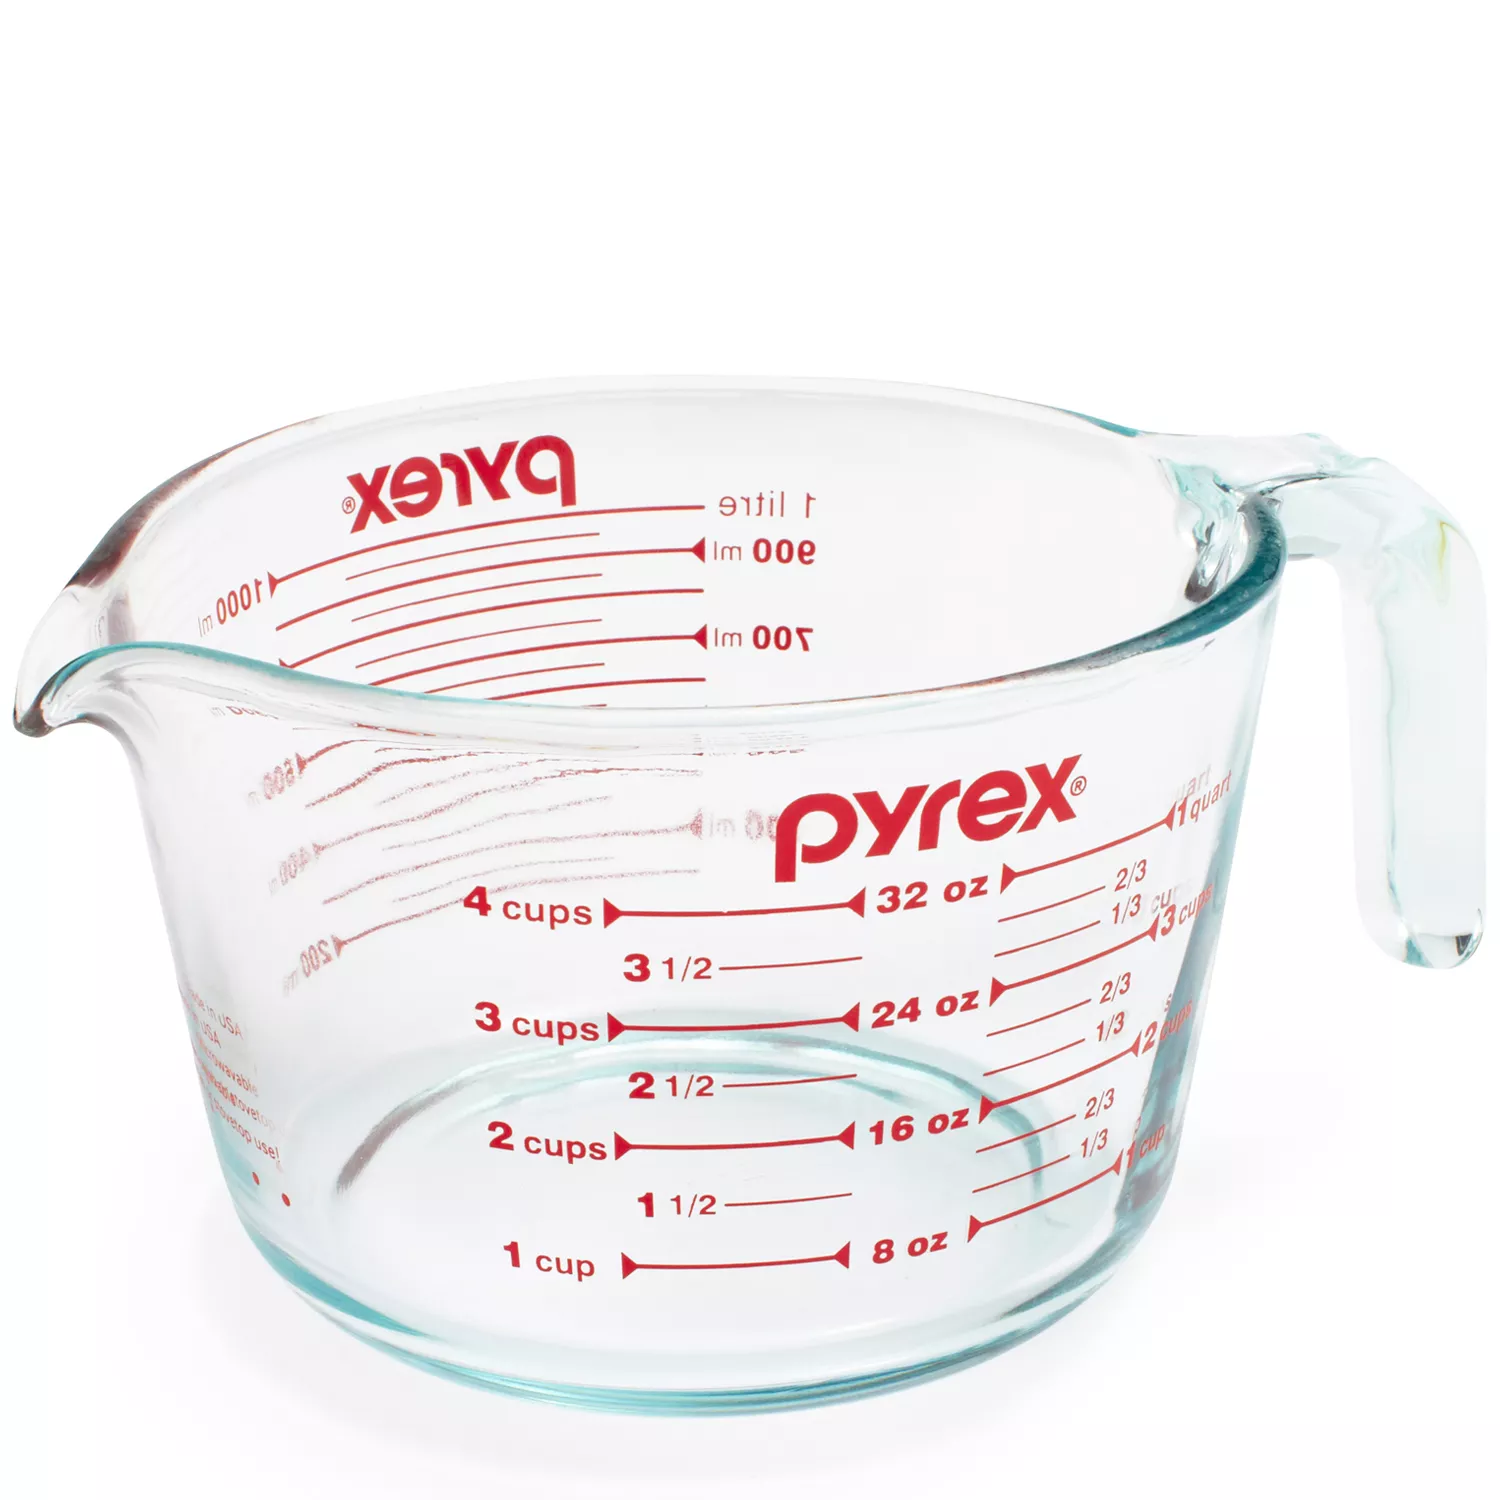 Shop Pyrex Glass Measuring Cups and more from Sur La Table!